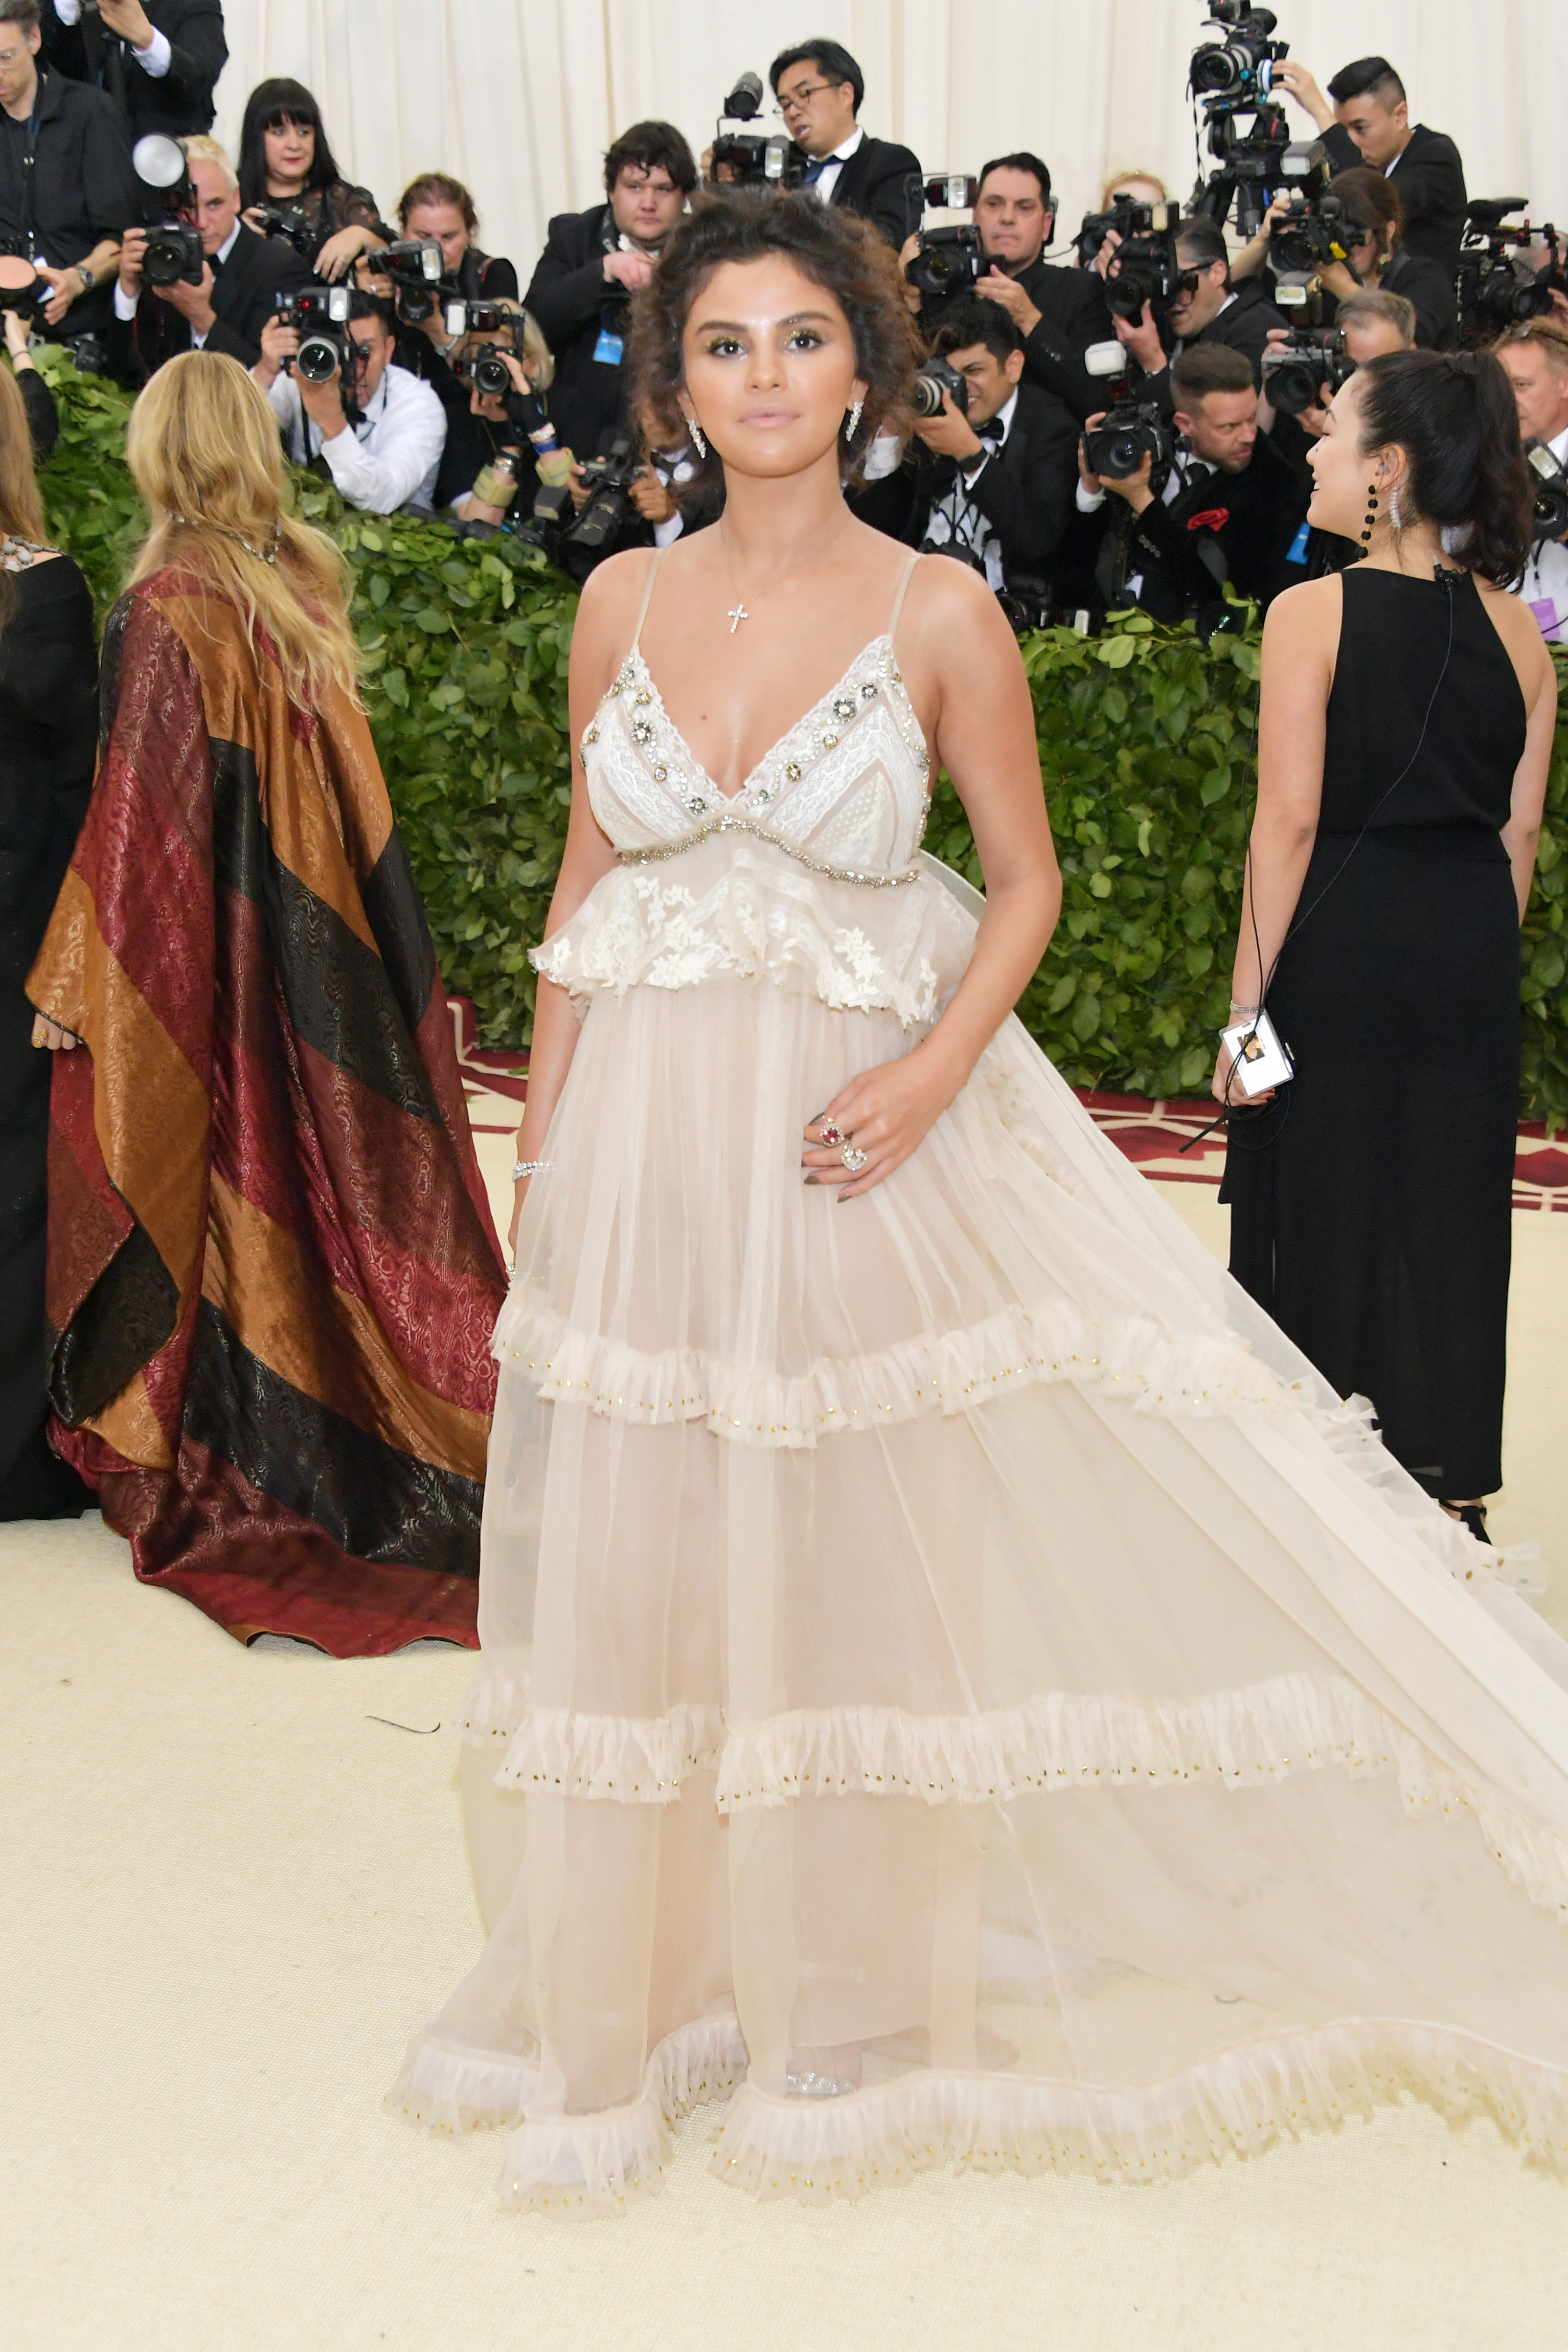 NEW YORK, NY - MAY 07: Selena Gomez attends the Heavenly Bodies: Fashion & The Catholic Imagination Costume Institute Gala at The Metropolitan Museum of Art on May 7, 2018 in New York City. (Photo by Neilson Barnard/Getty Images)